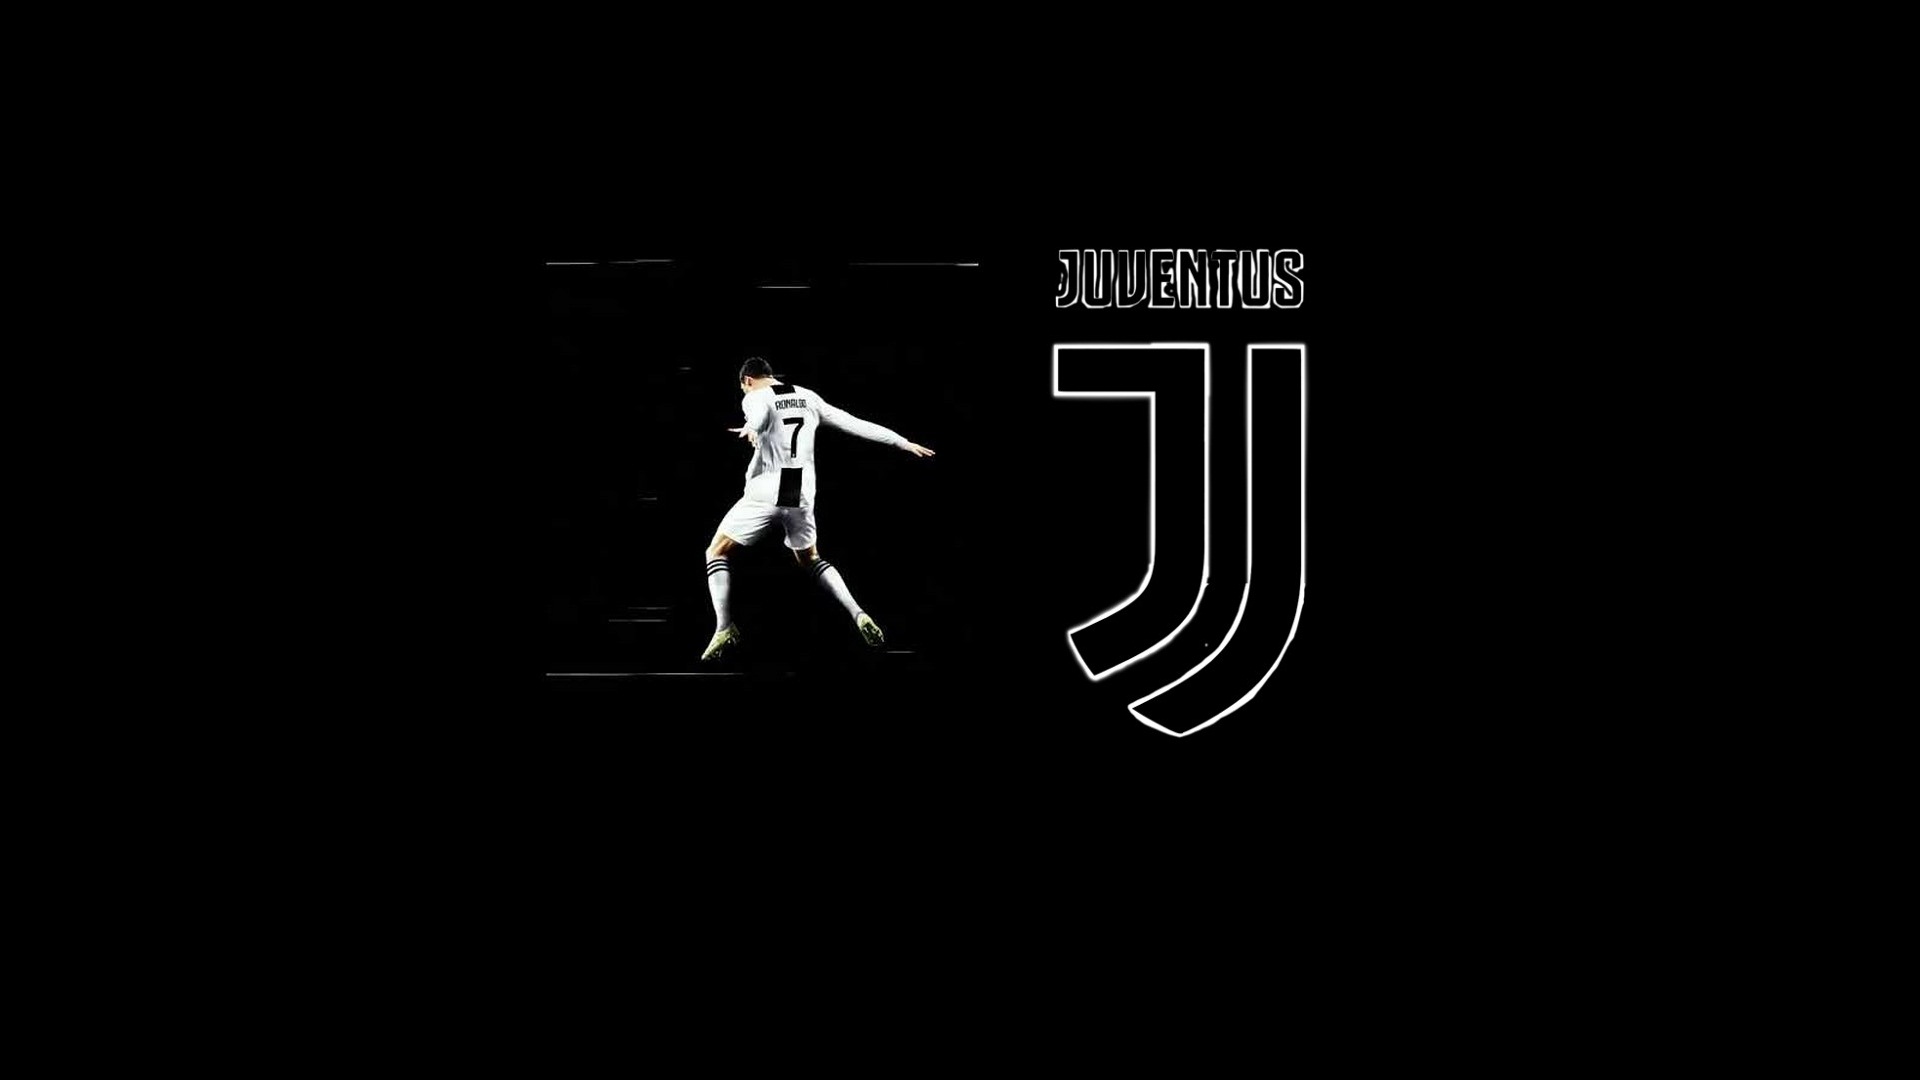 CR7 Juventus Desktop Wallpapers with resolution 1920x1080 pixel. You can make this wallpaper for your Mac or Windows Desktop Background, iPhone, Android or Tablet and another Smartphone device